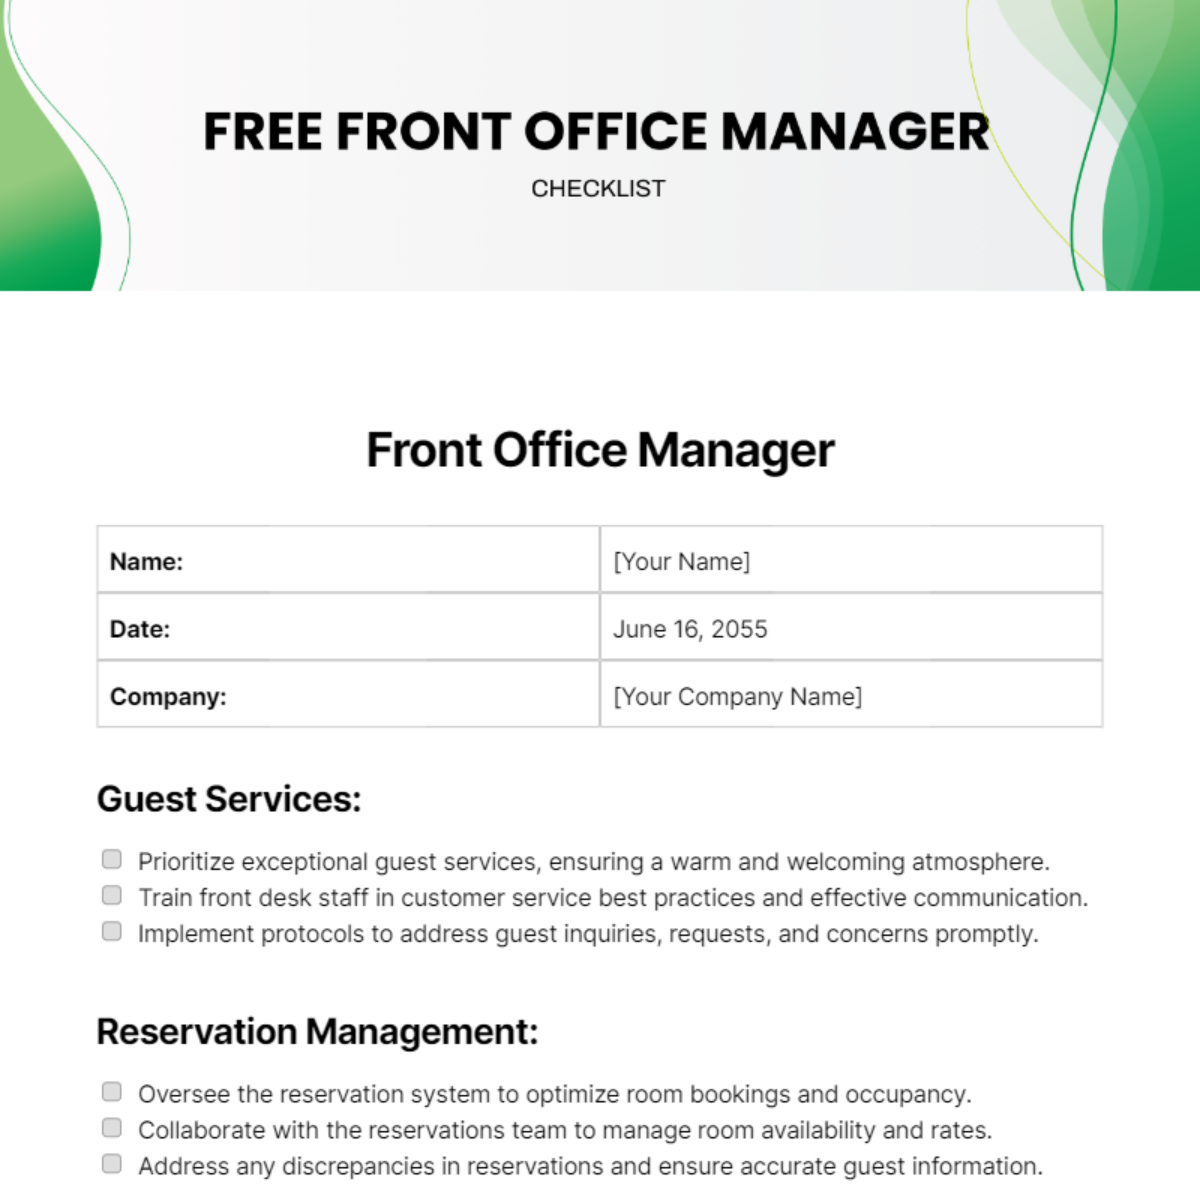 Front Office Manager Checklist Template